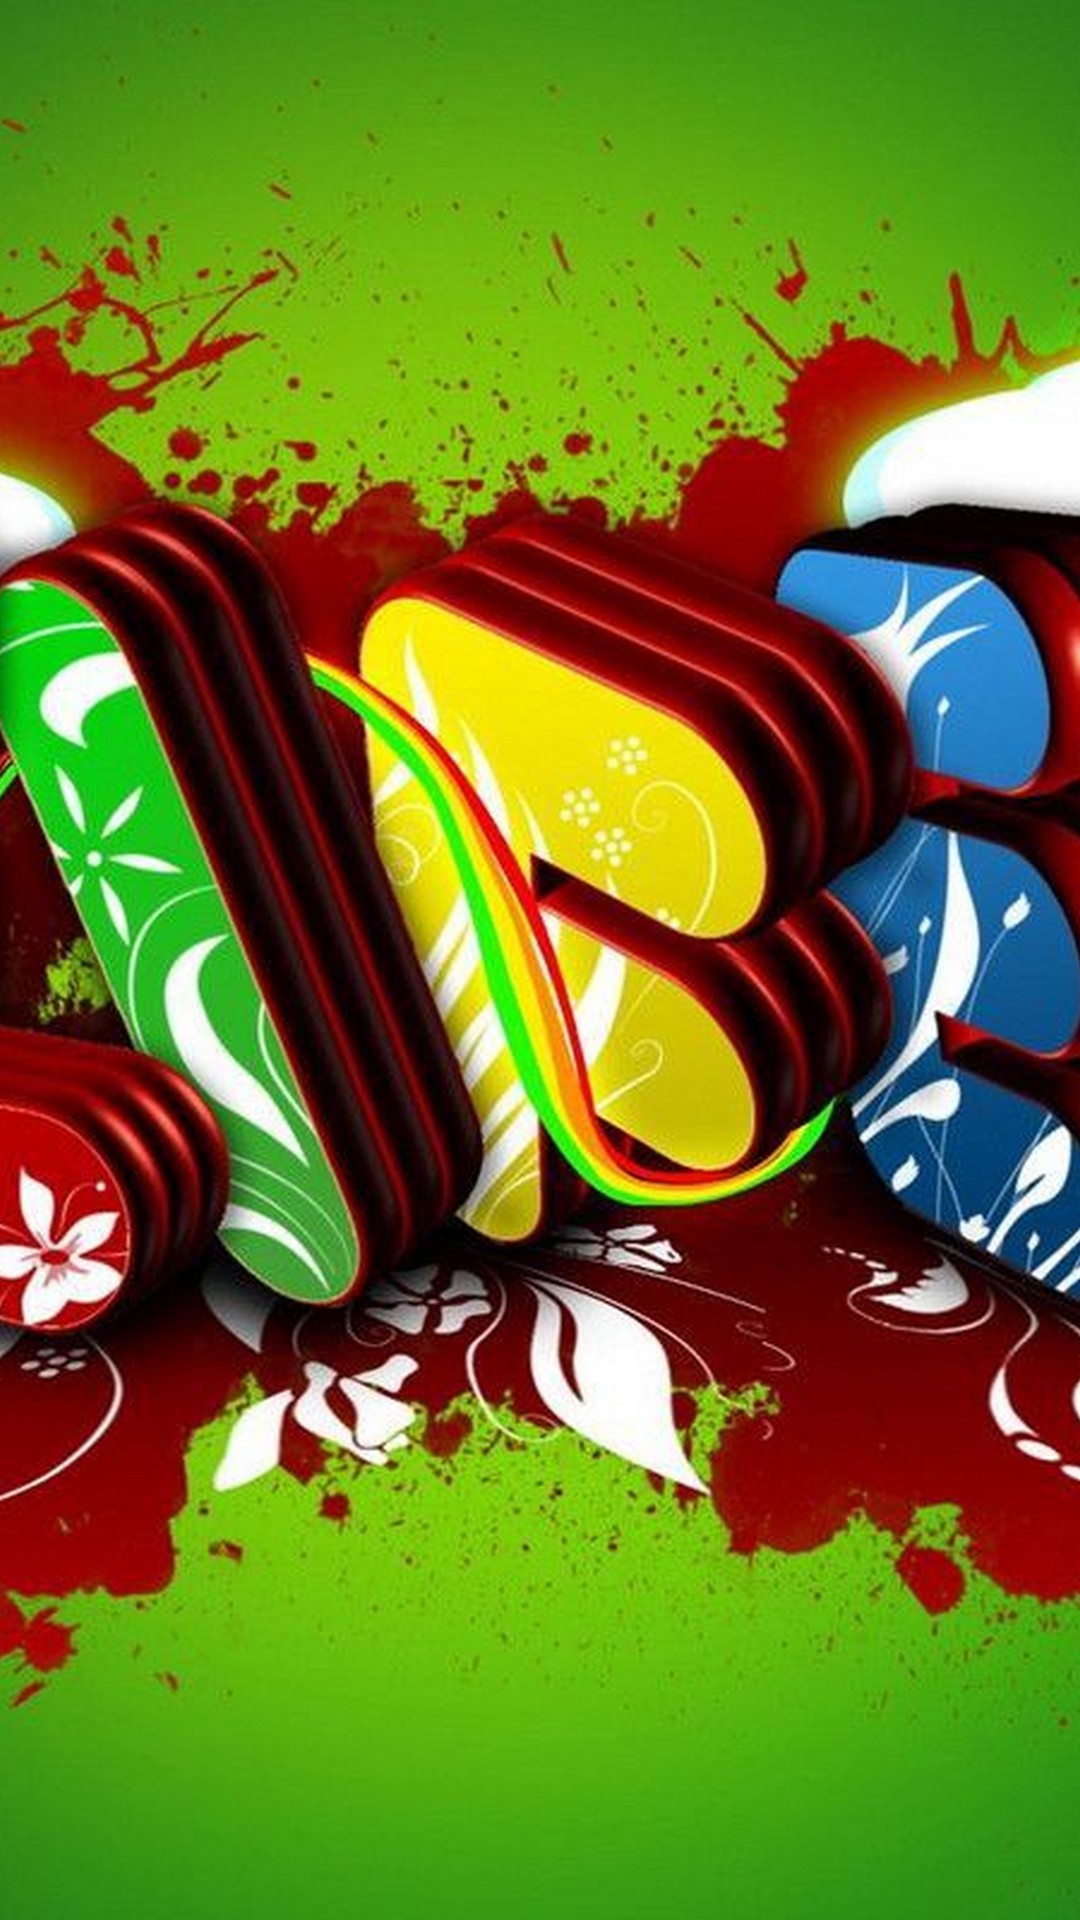 Android Wallpaper Graffiti Letters With Image Resolution - Cool Backgrounds Of Graffiti - HD Wallpaper 